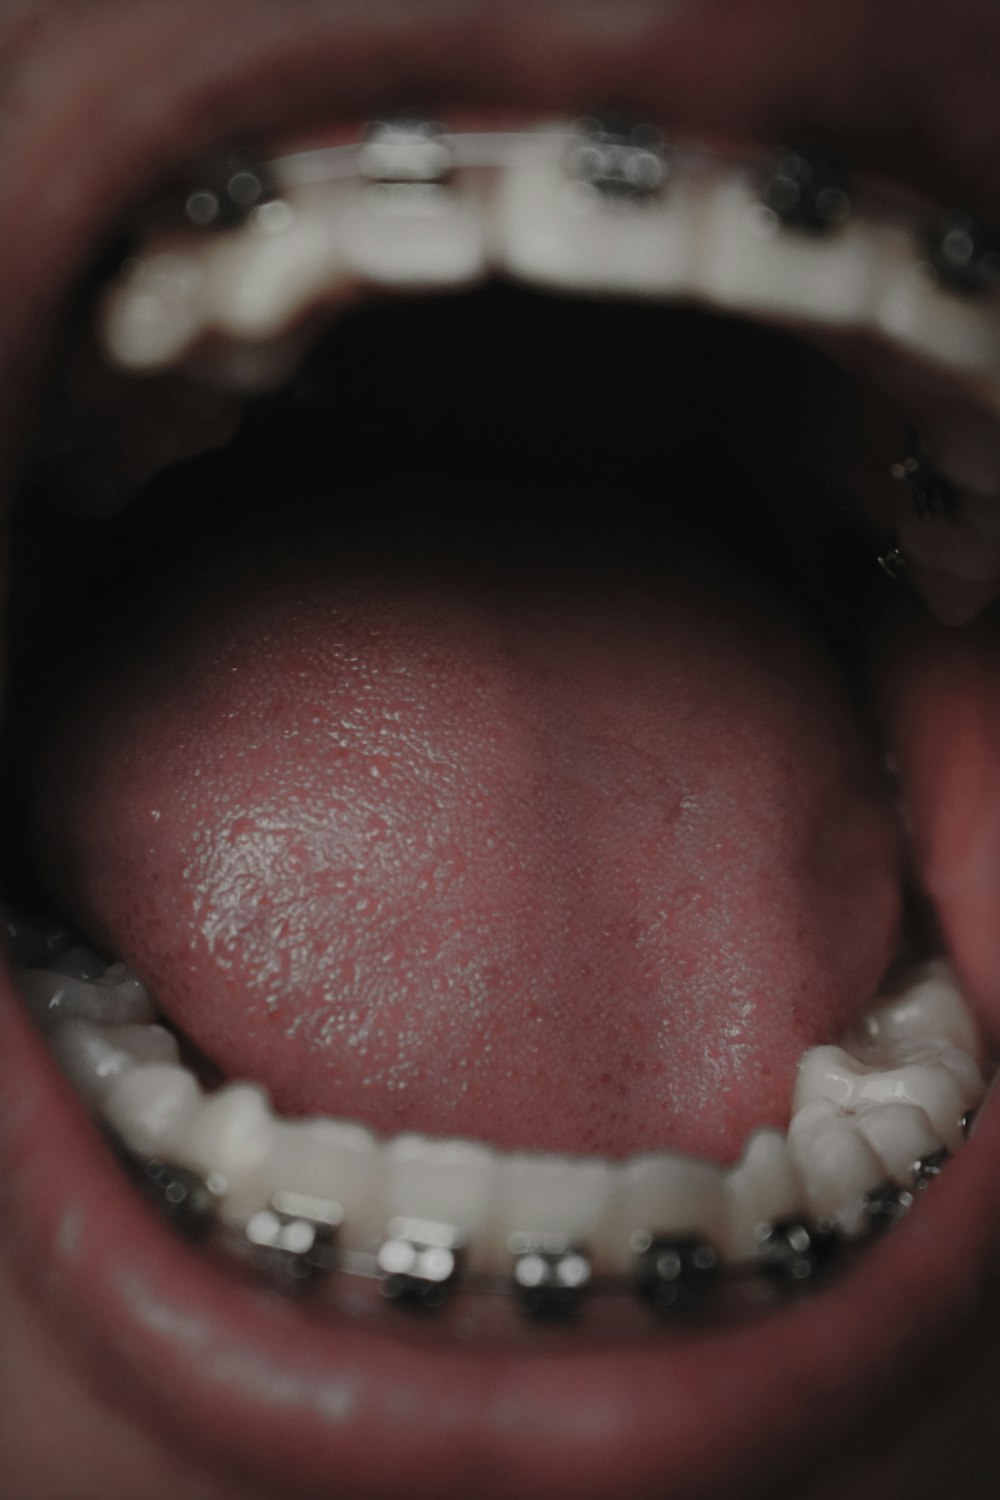 persons mouth open in close up photography